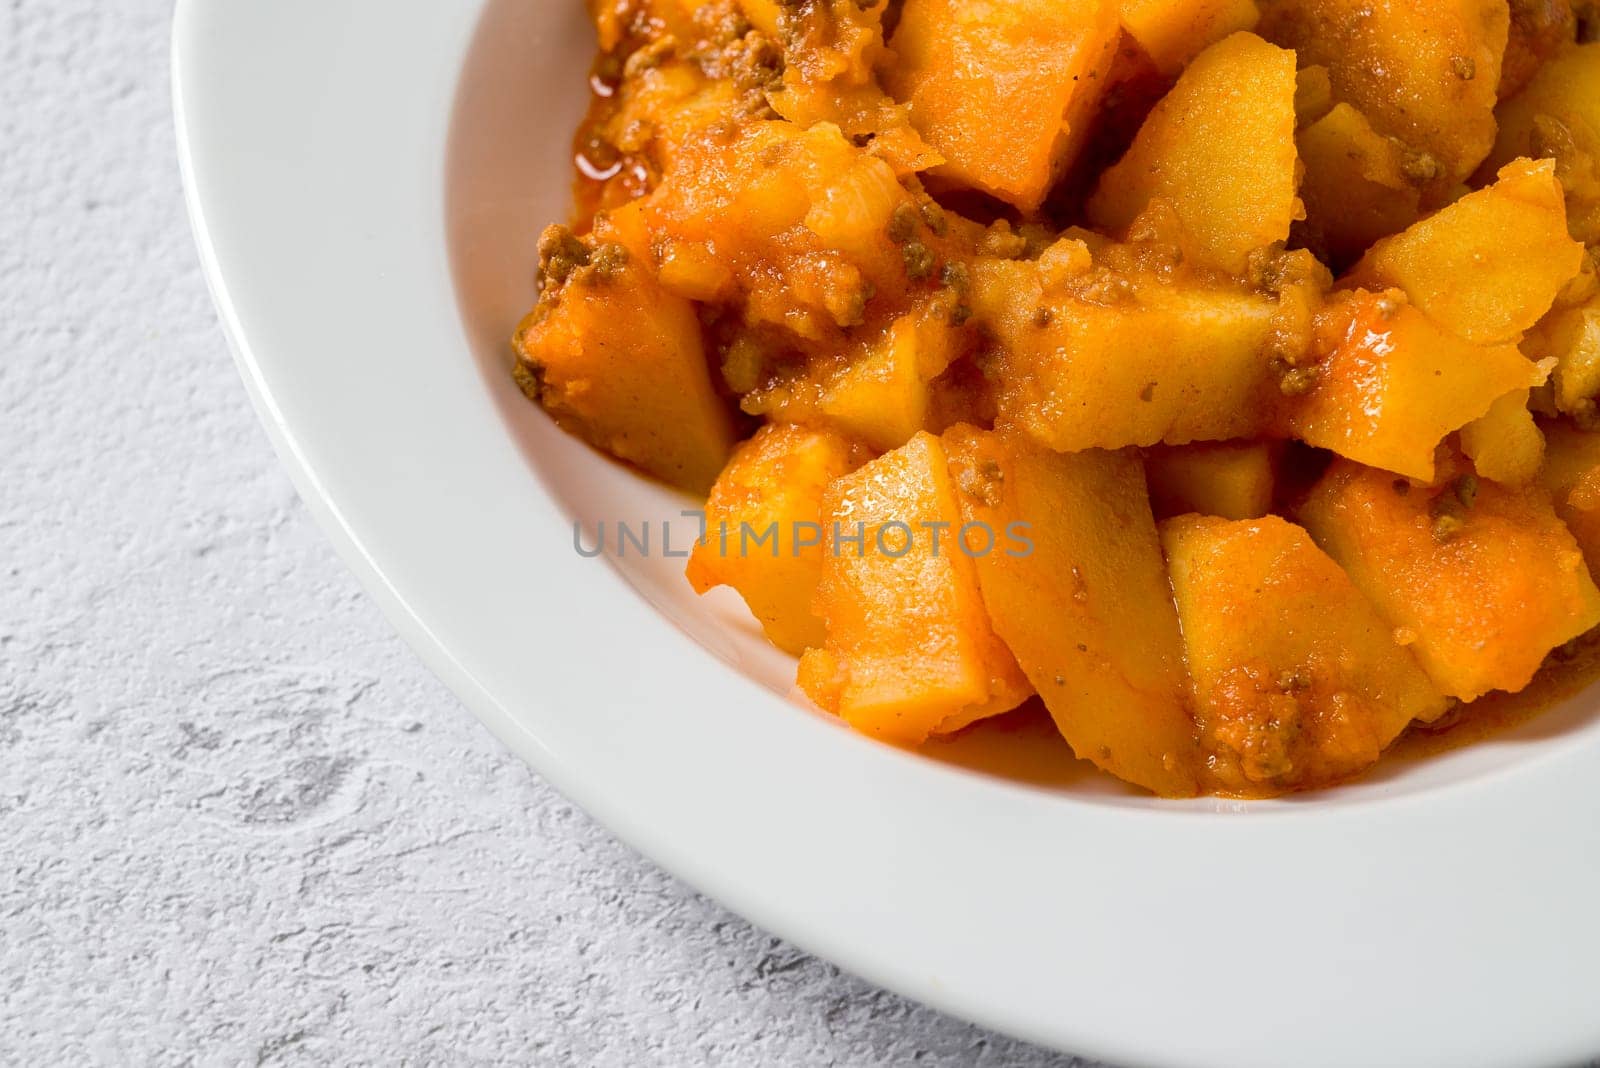 Minced meat and potato dish on white porcelain plate on stone table